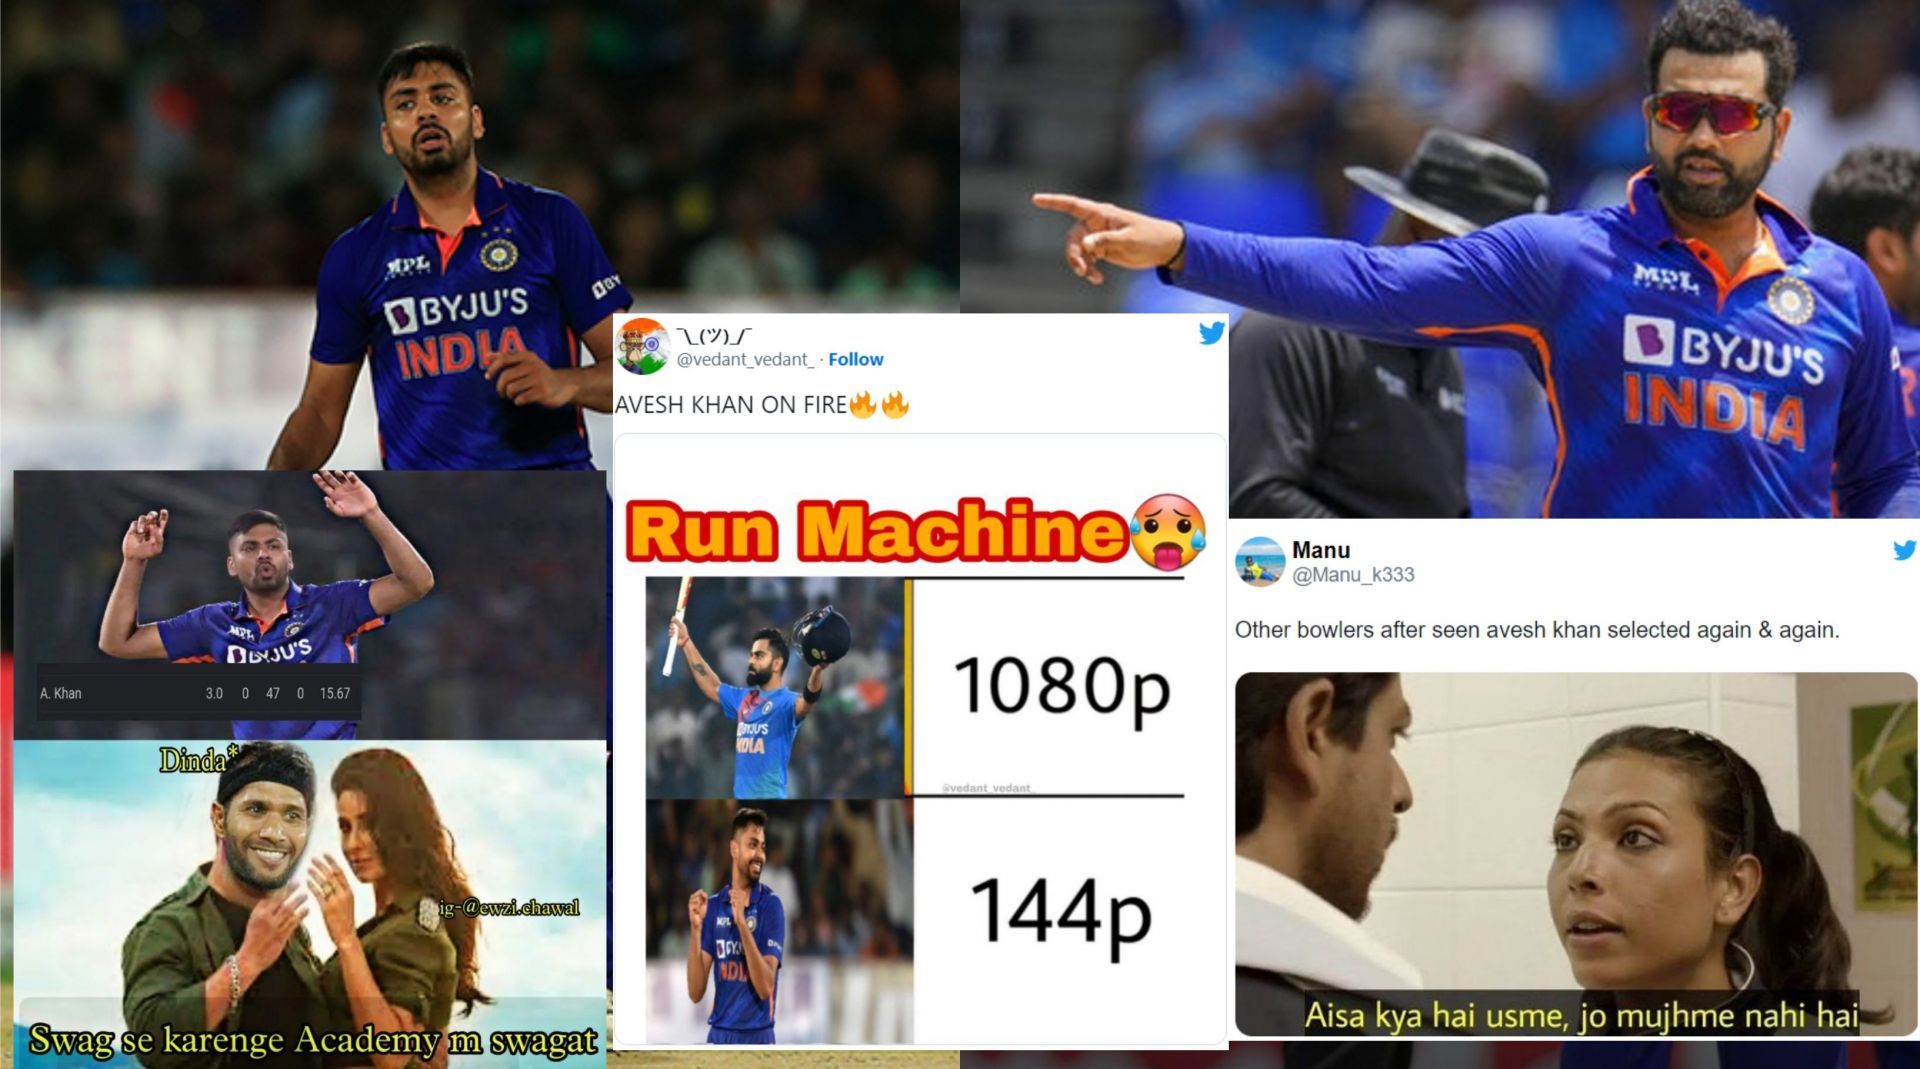 Fans troll Avesh Khan for the poor showing in the T20I series so far